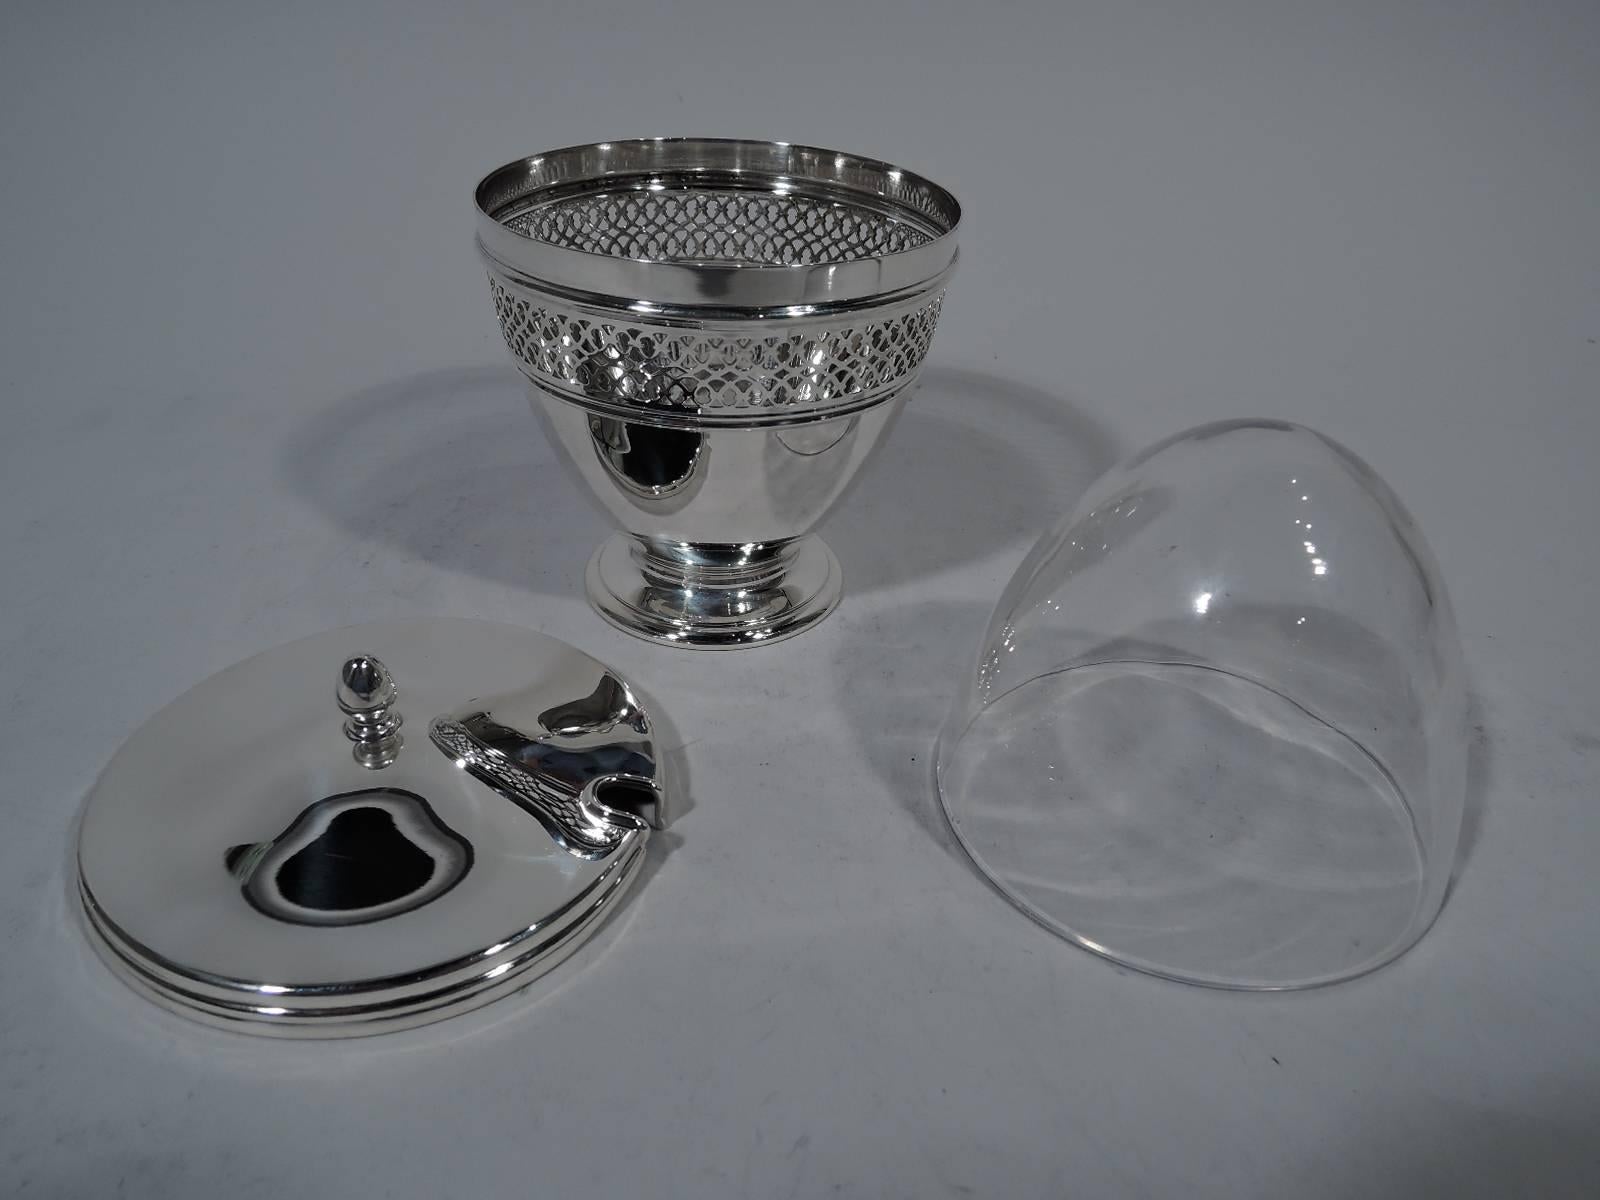 Edwardian sterling silver jam pot. Made by Tiffany & Co. in New York, circa 1913. Curved sides and raised foot. Band of pierced scrollwork near rim. Cover gently raised with acorn finial. Clear glass liner. Hallmark includes pattern no. 18423 (first